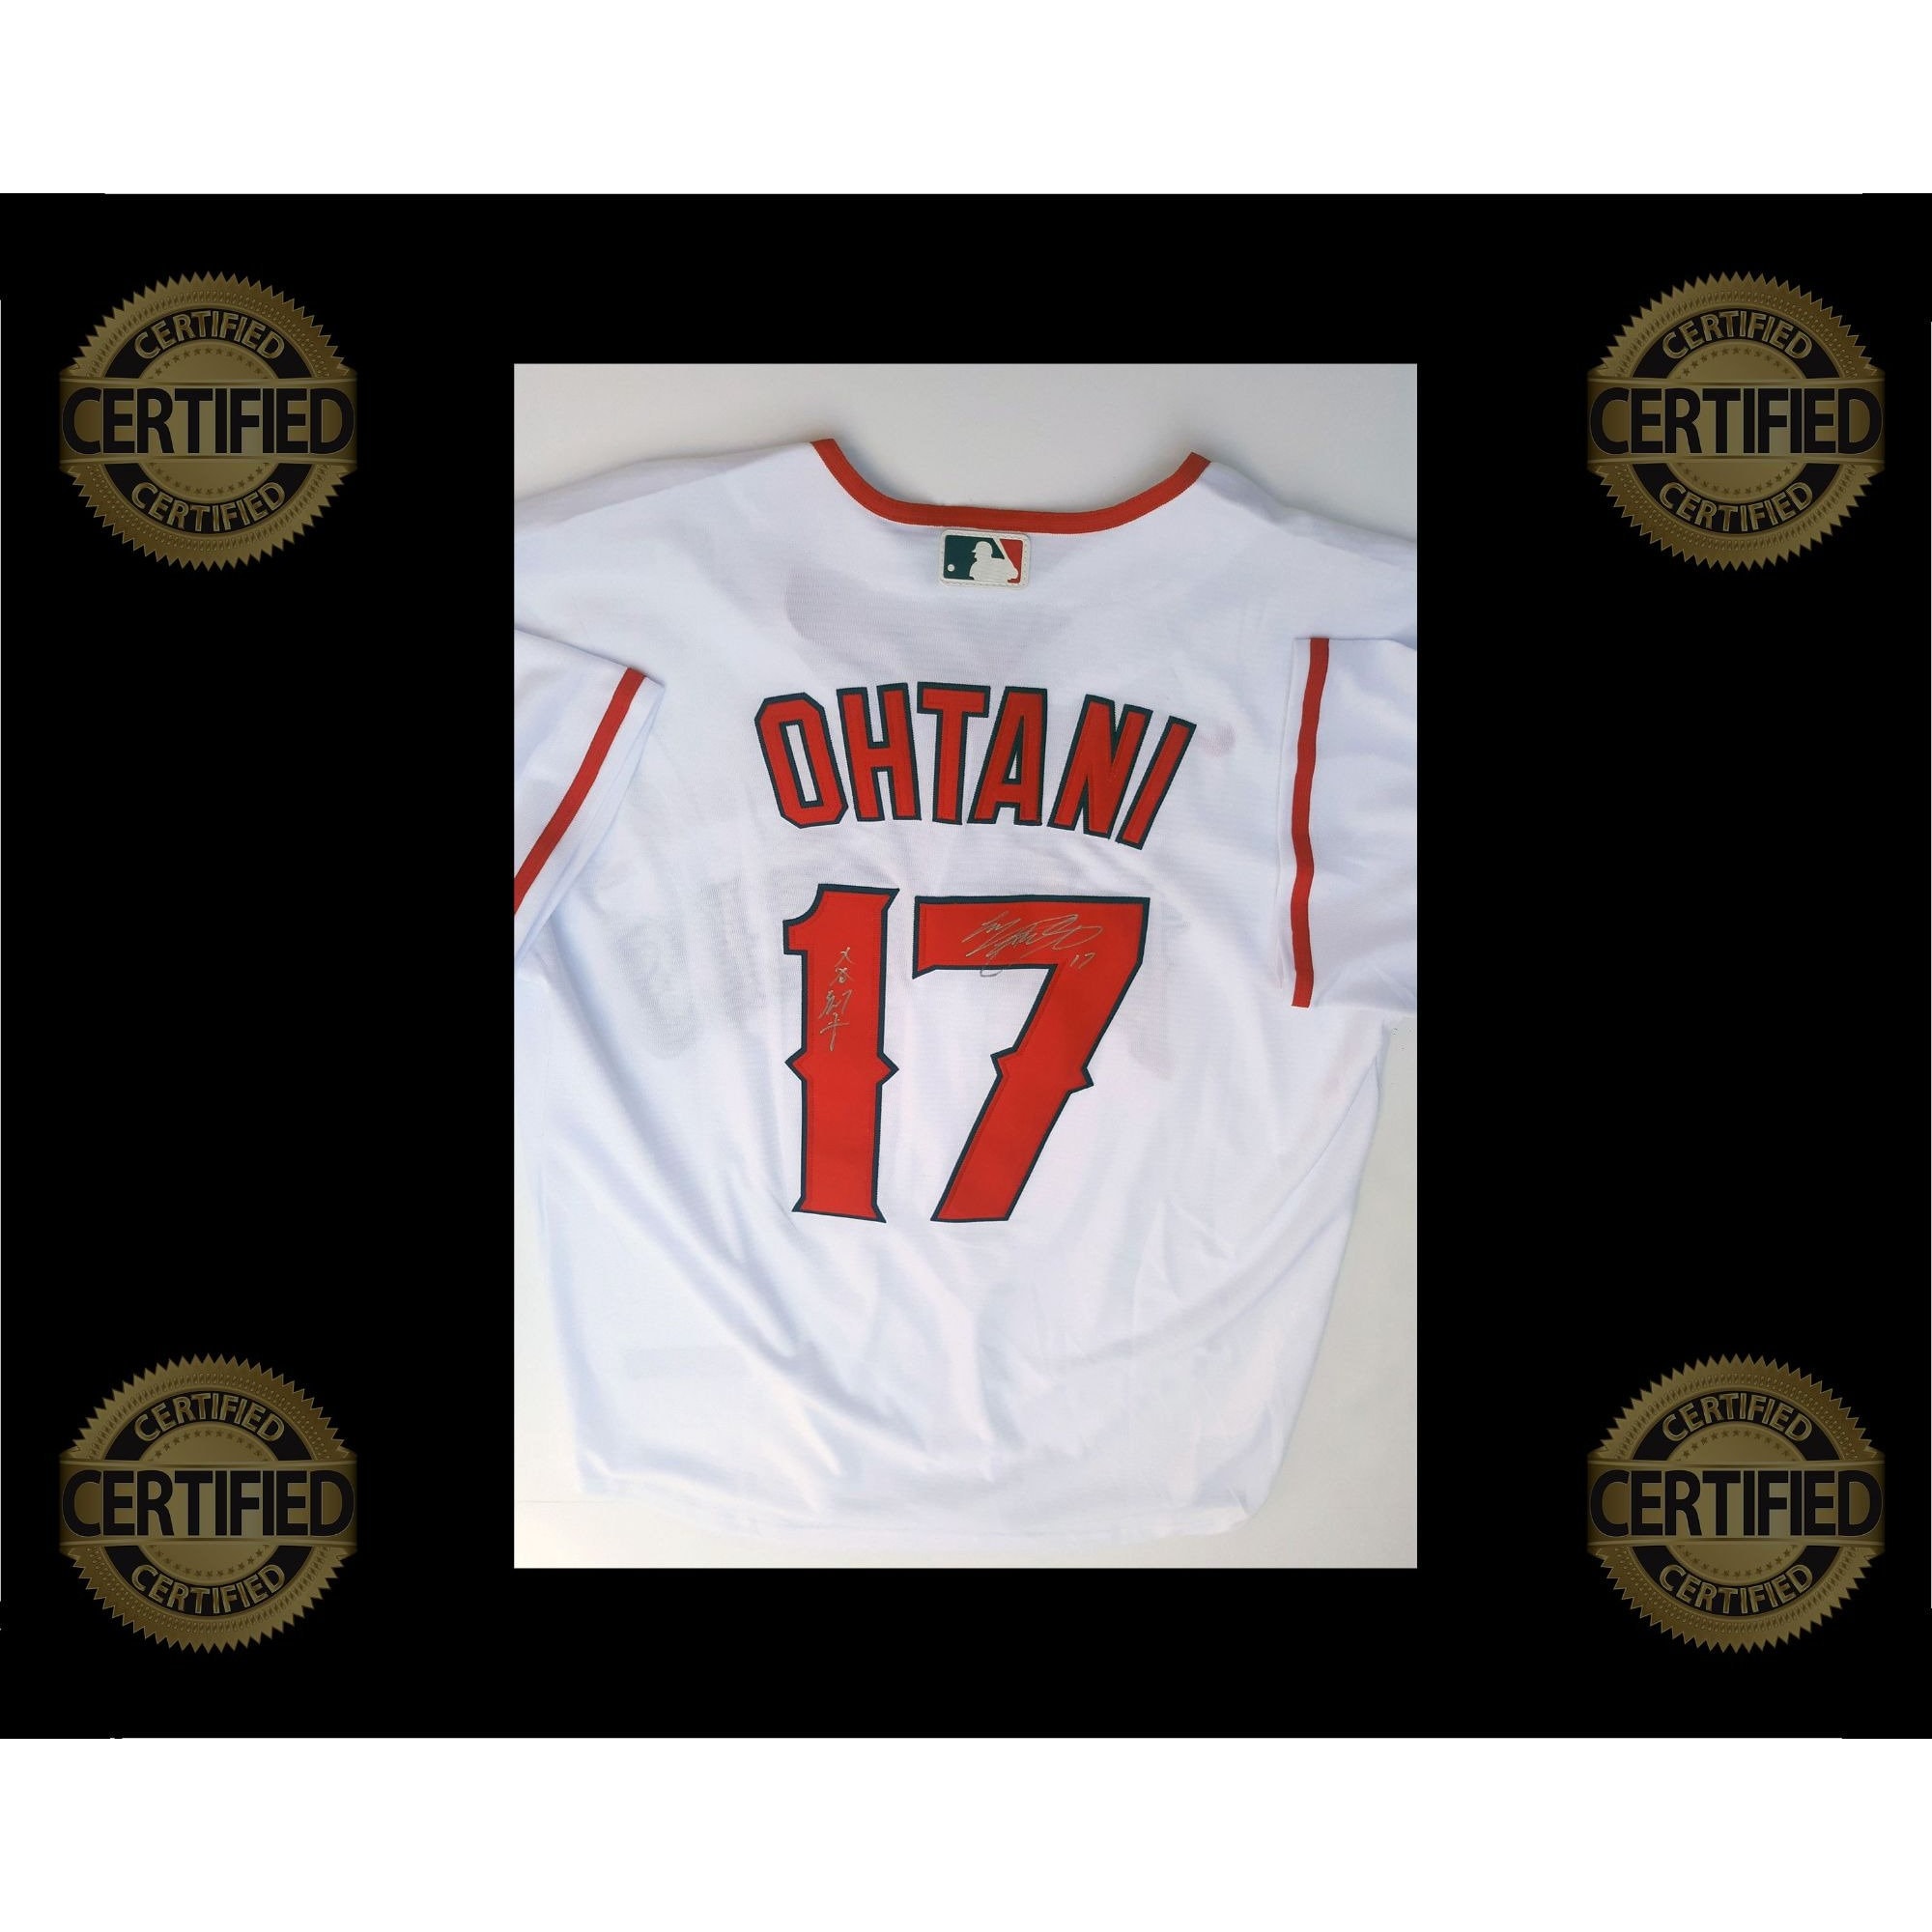 AnastasiasArchives Shohei Ohtani Los Angeles Angels Authentic Jersey Size XL Japanese and English with Proof